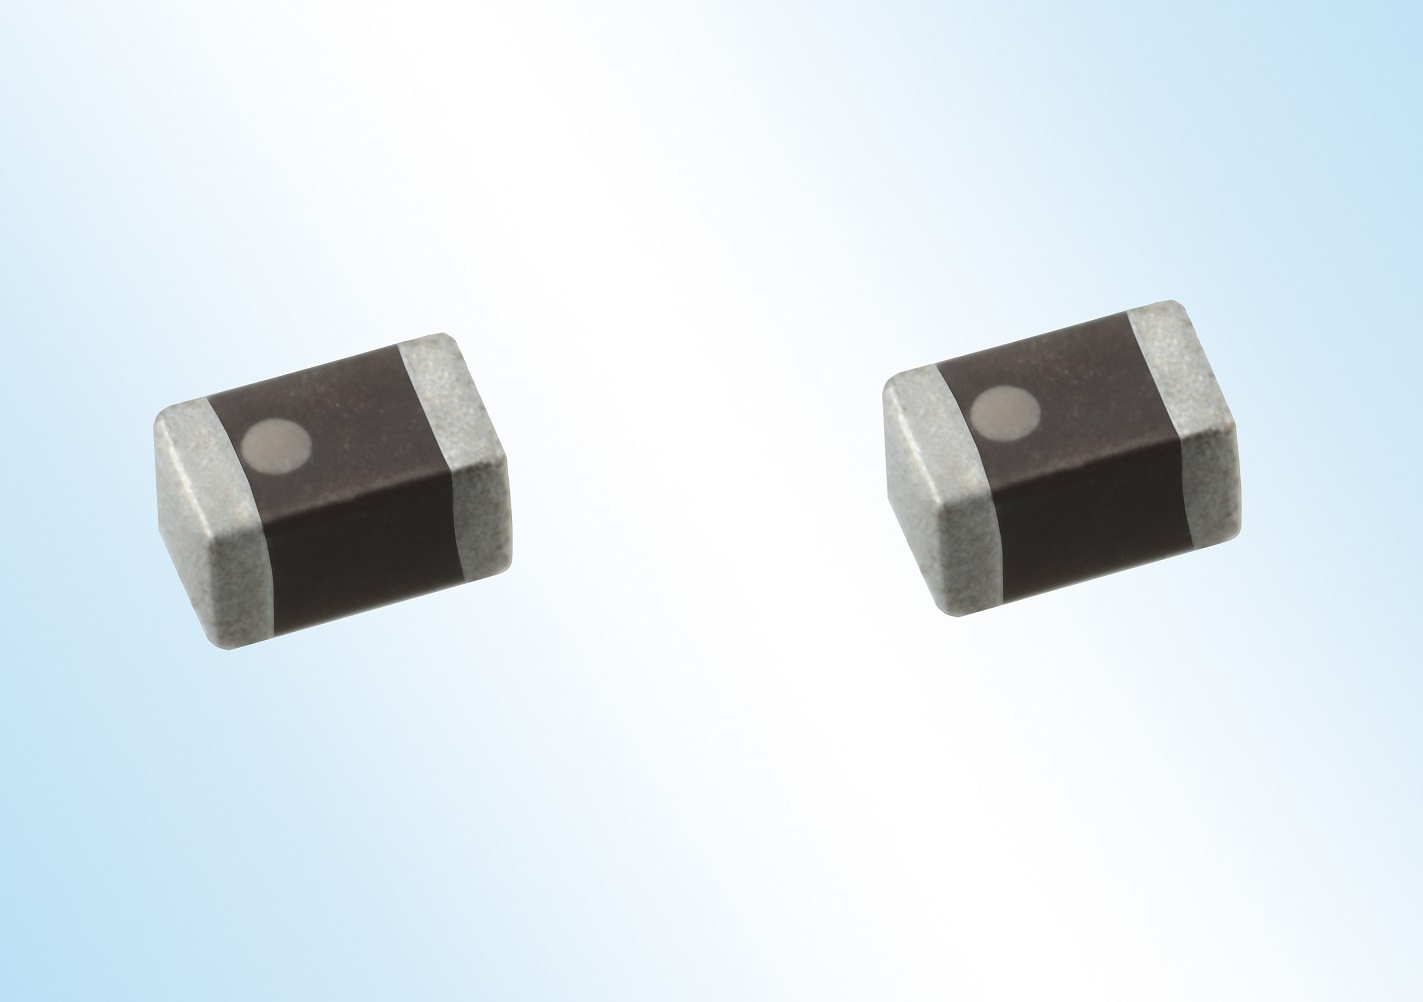 TDK's Low-Resistance Multilayer Ferrite Inductors for NFC